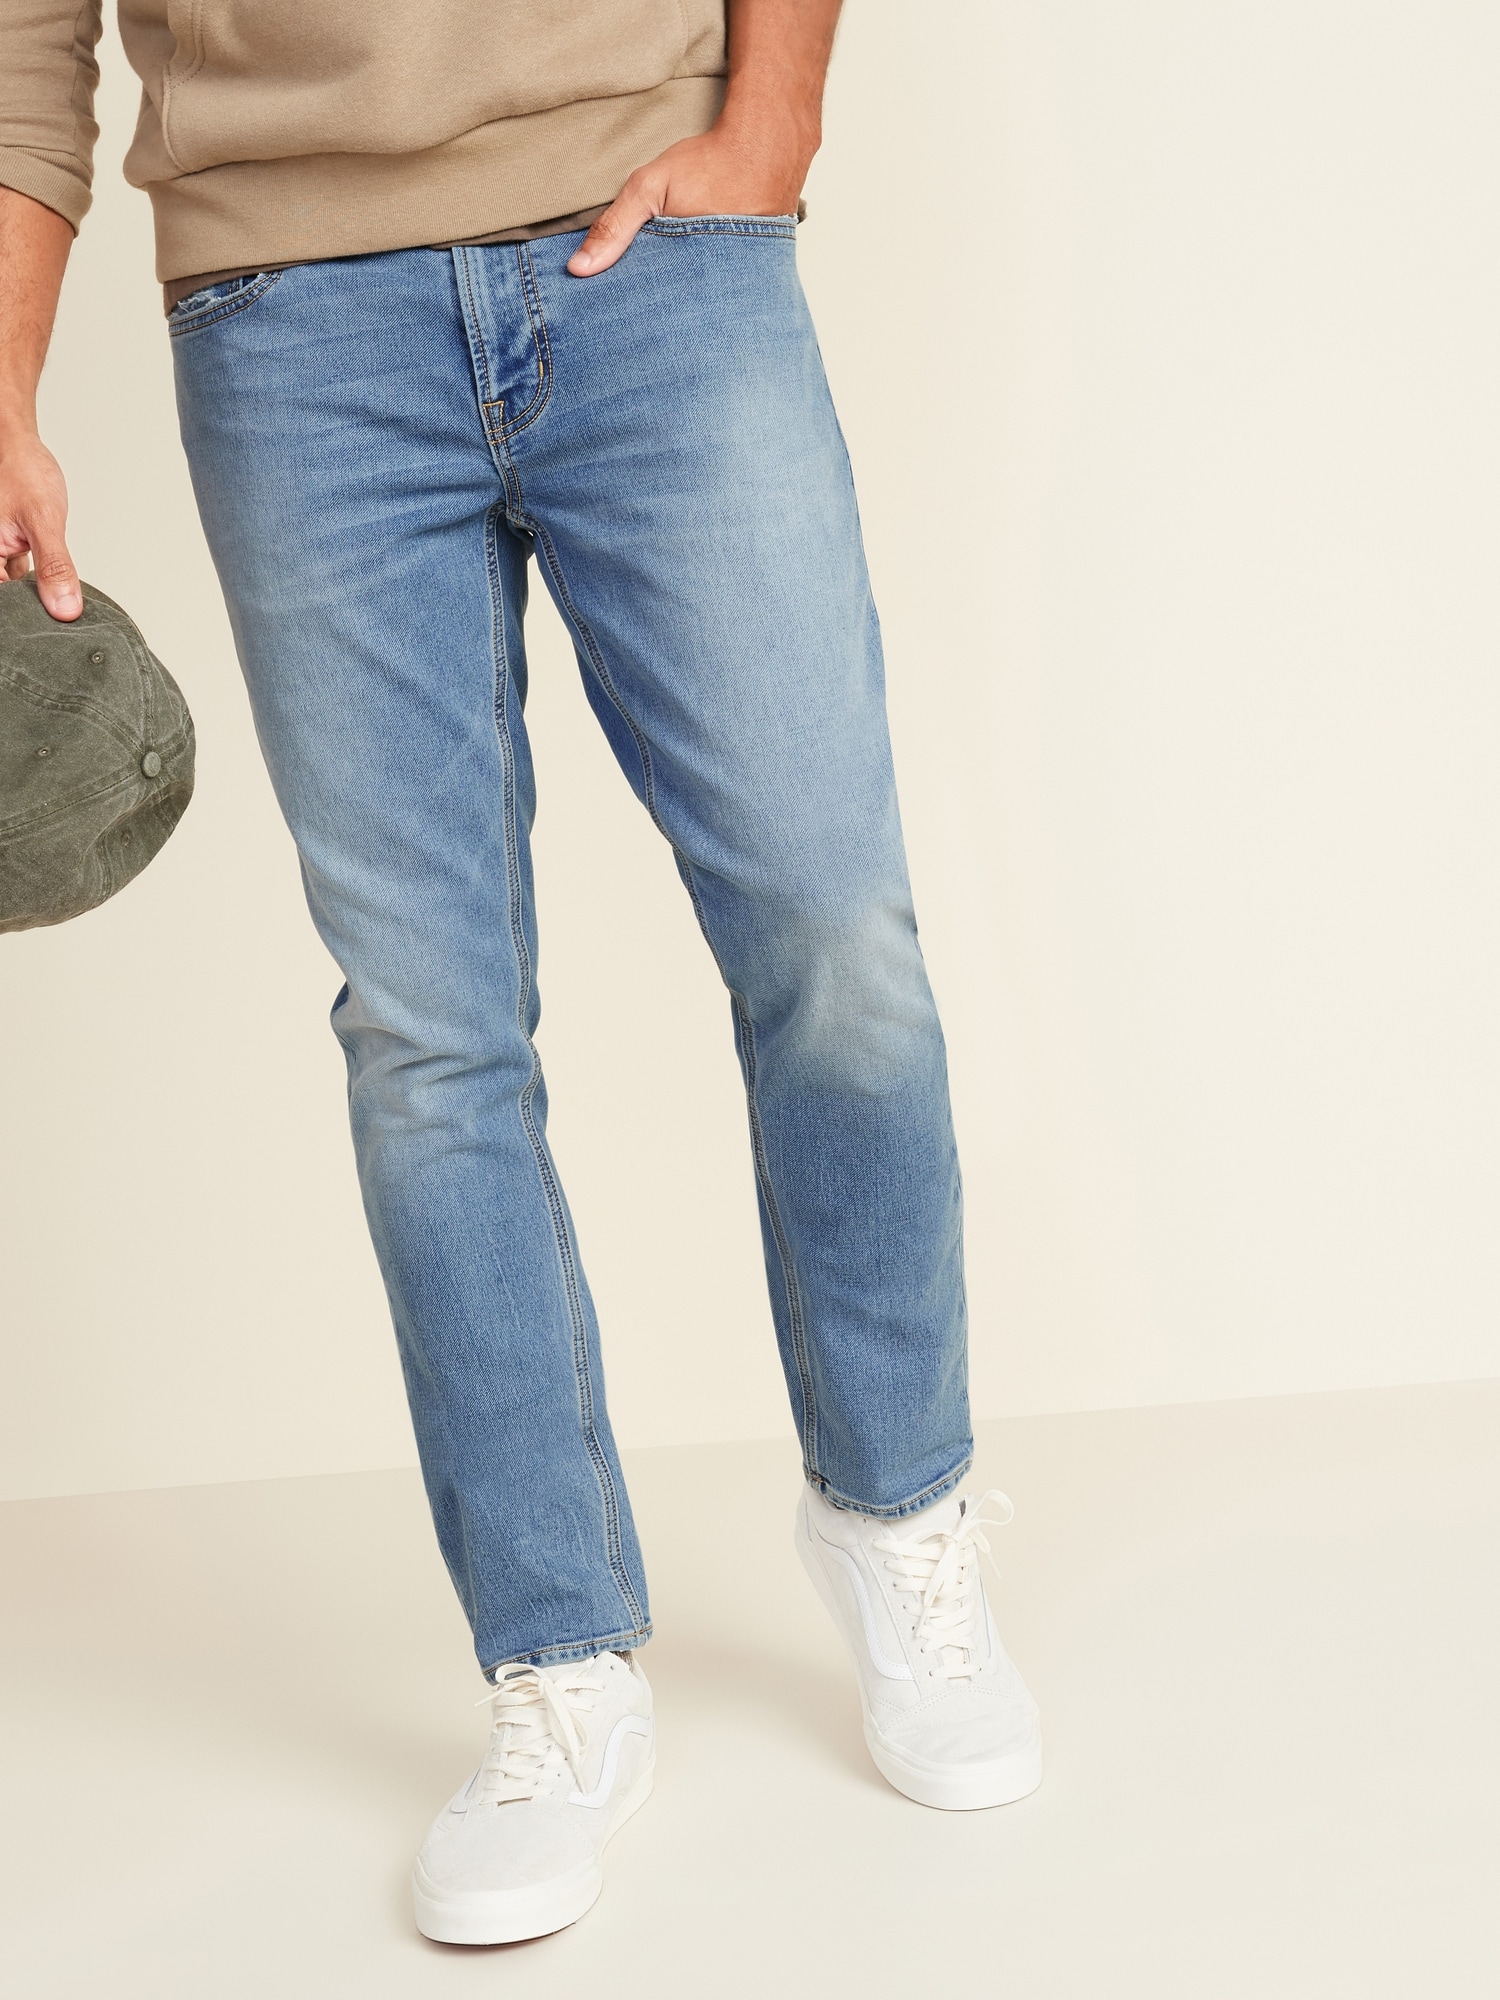 old navy built in tough jeans